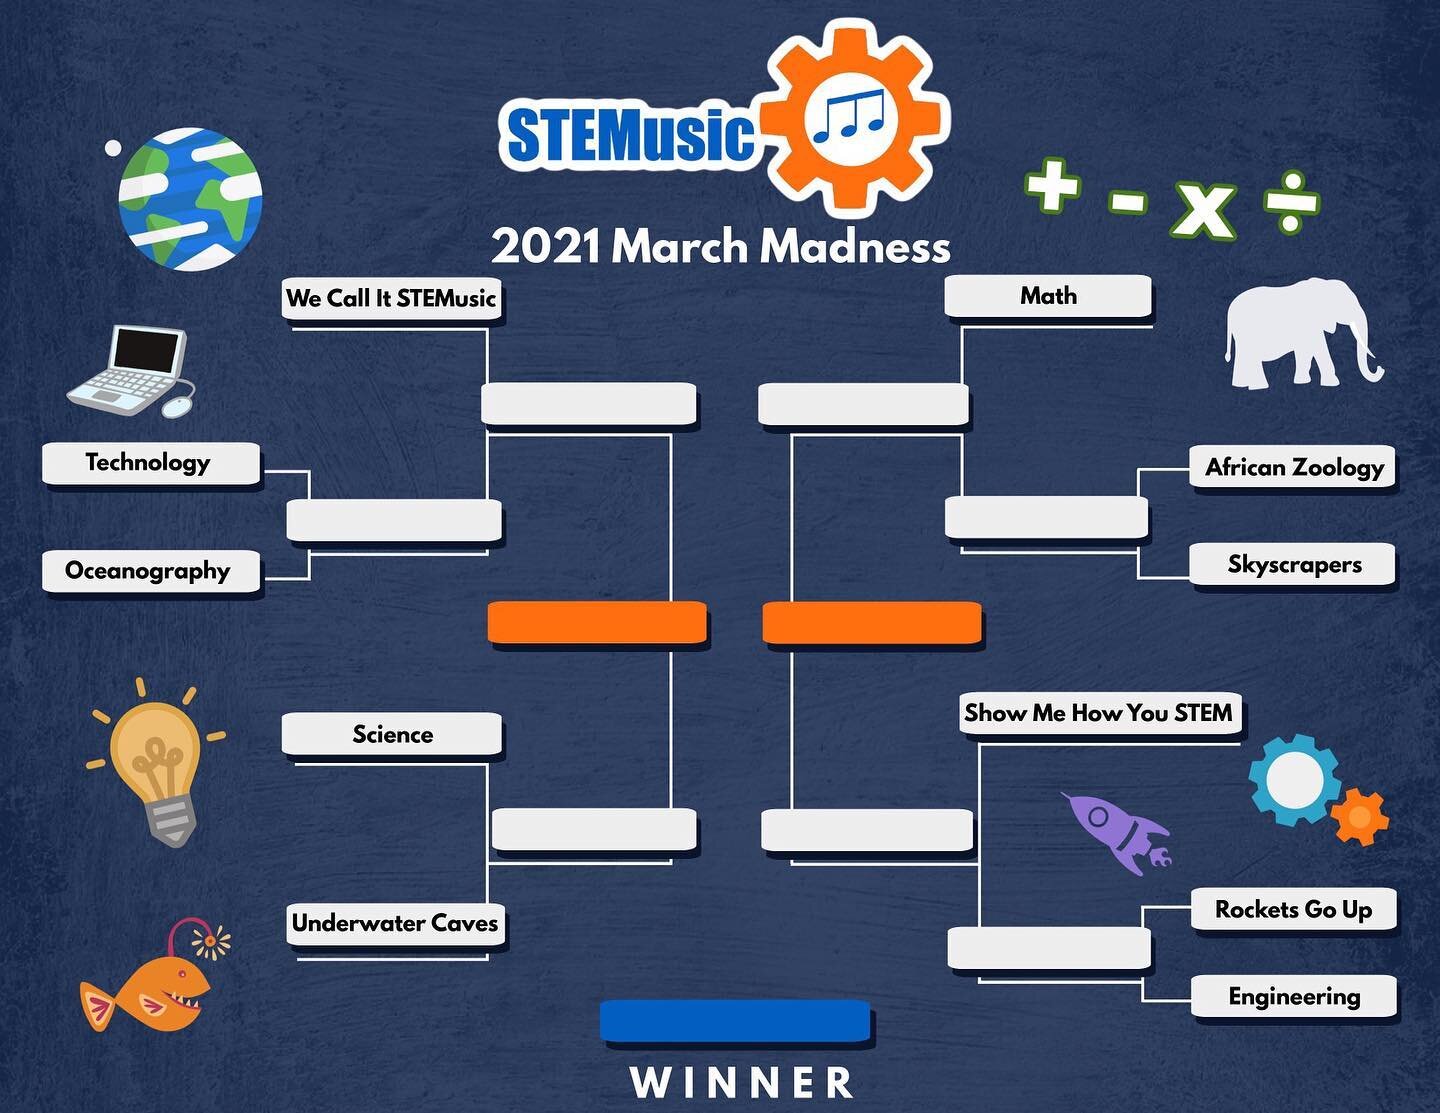 STEMusic March Madness Starts Tomorrow!!! 

Download your bracket and fill it out. What song do you think will win it all???

Link in Bio! 

#marchmadness #STEMusic #LetsGo #STEM #STEAM #Vote #Fun #Basketball #Music #NCAA #Bracket #Bracketology #song